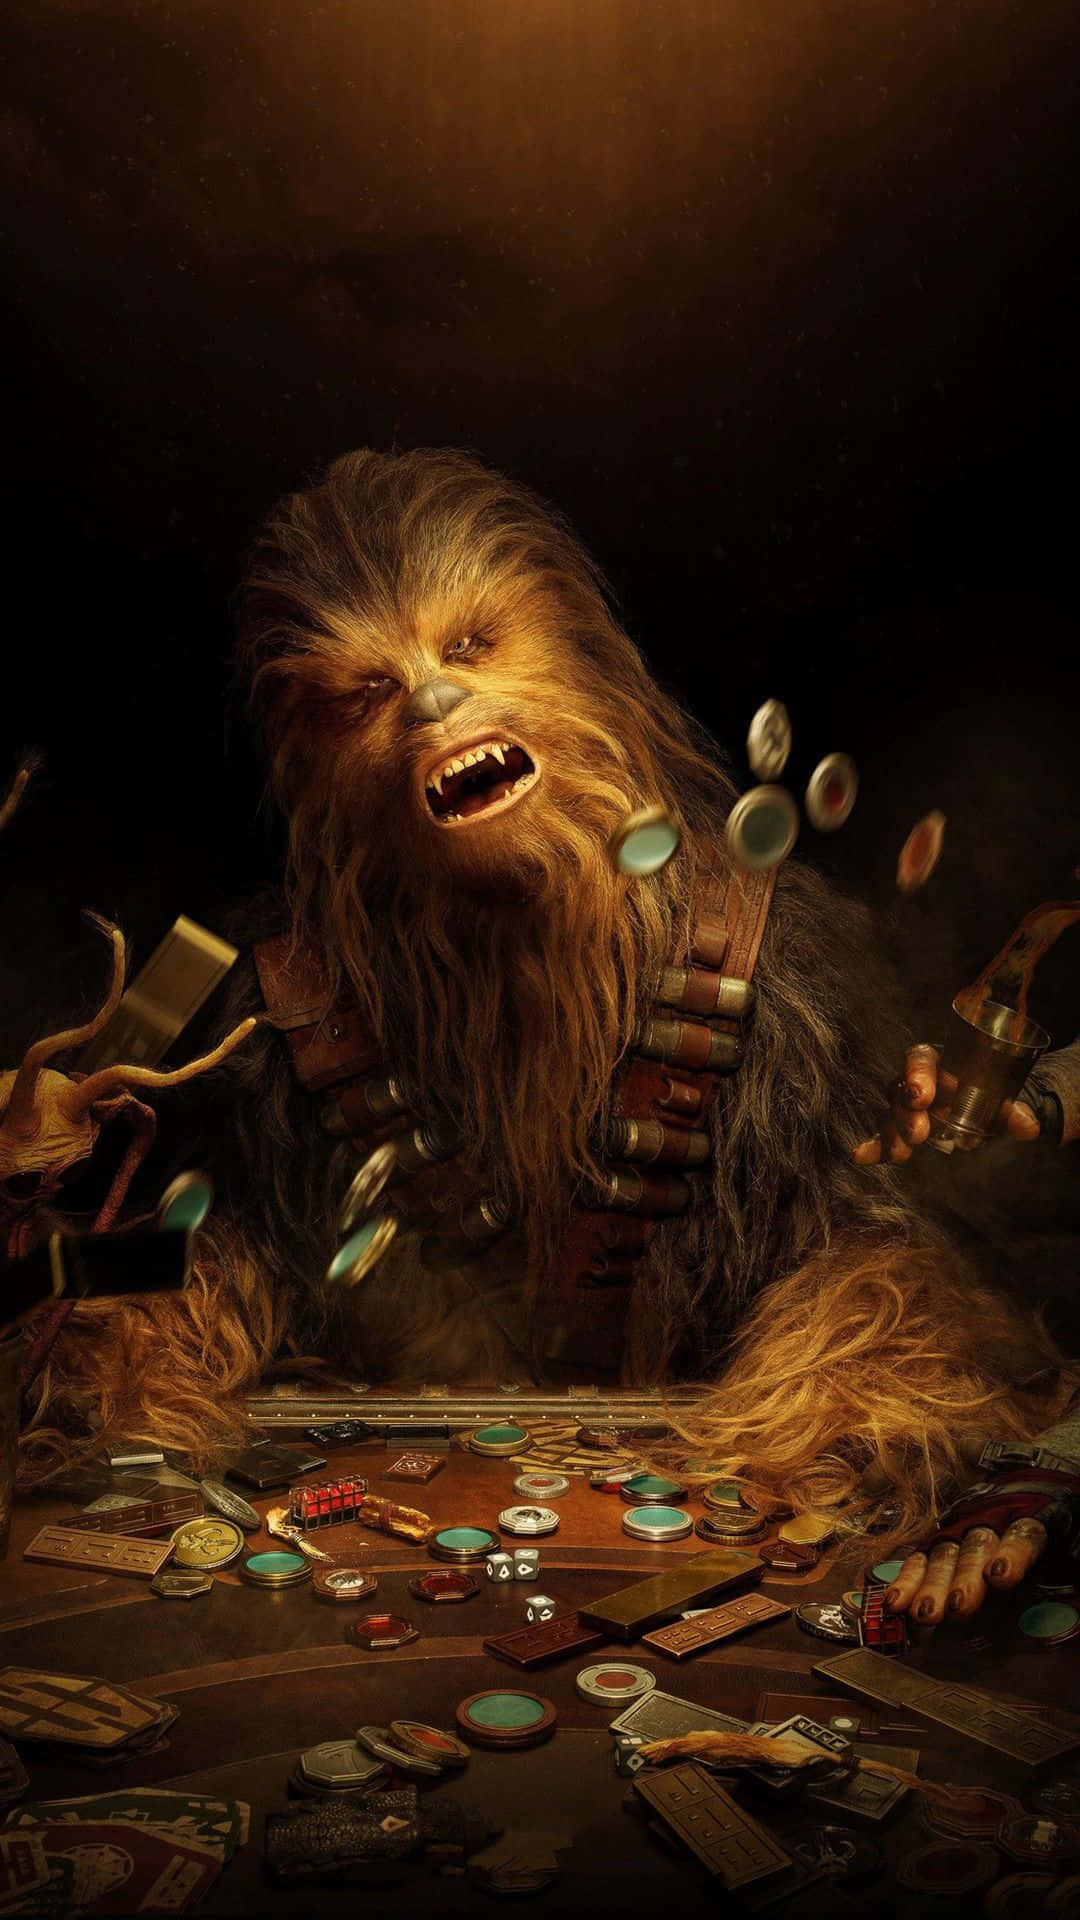 A wookiee roars with strength and courage in the face of danger Wallpaper